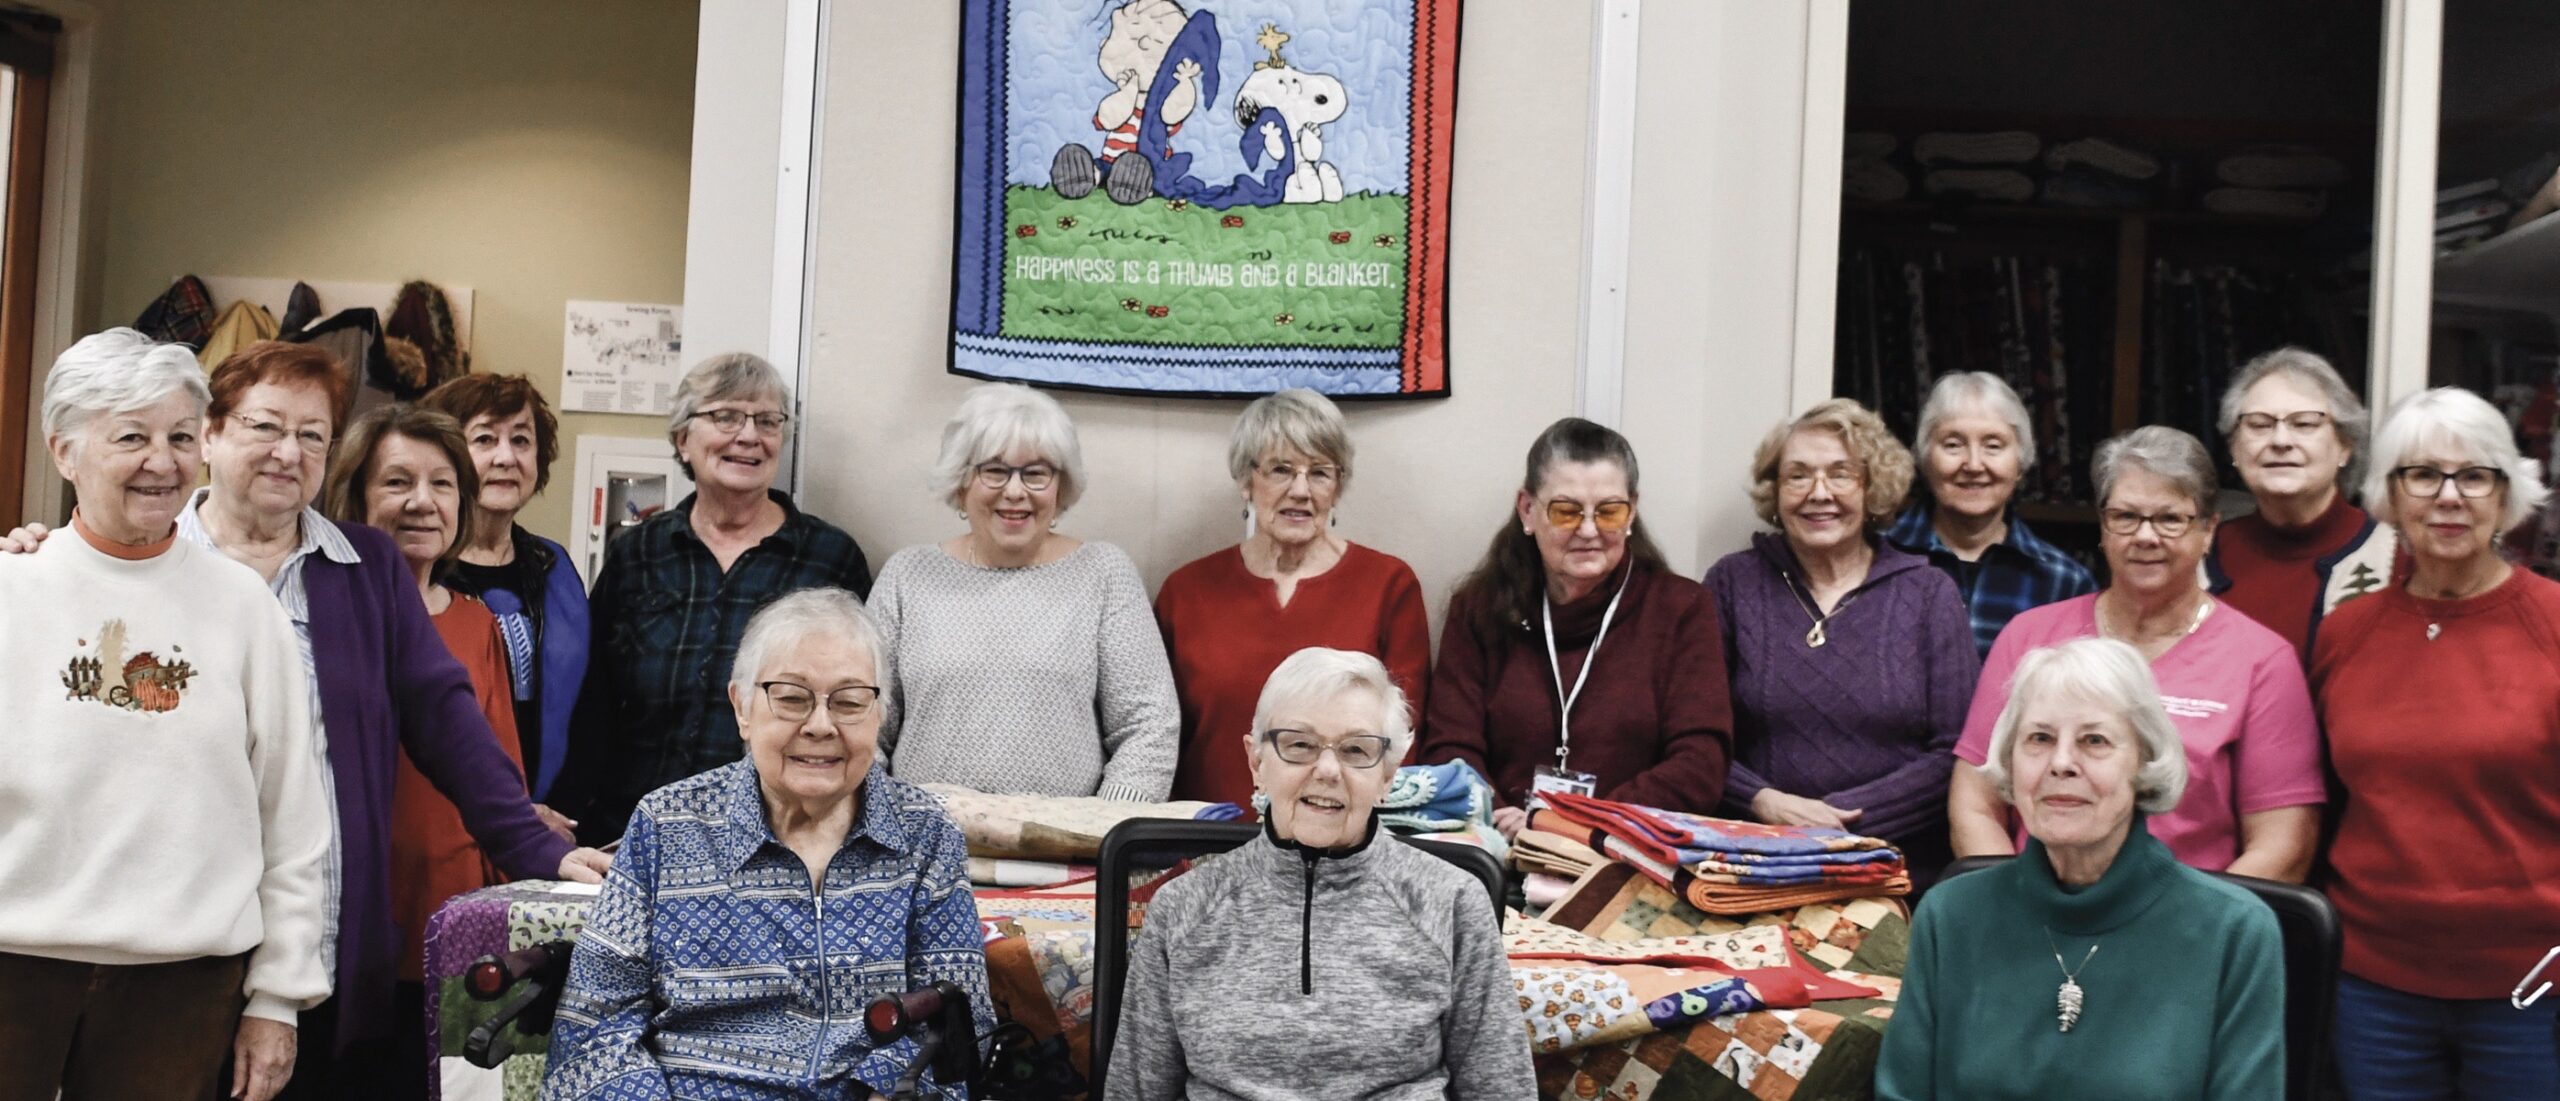 Some of the Members of Project Linus group gather to celebrate their 20,000 Quilts donated. (Photo by Christine Such/My Sun Day News)